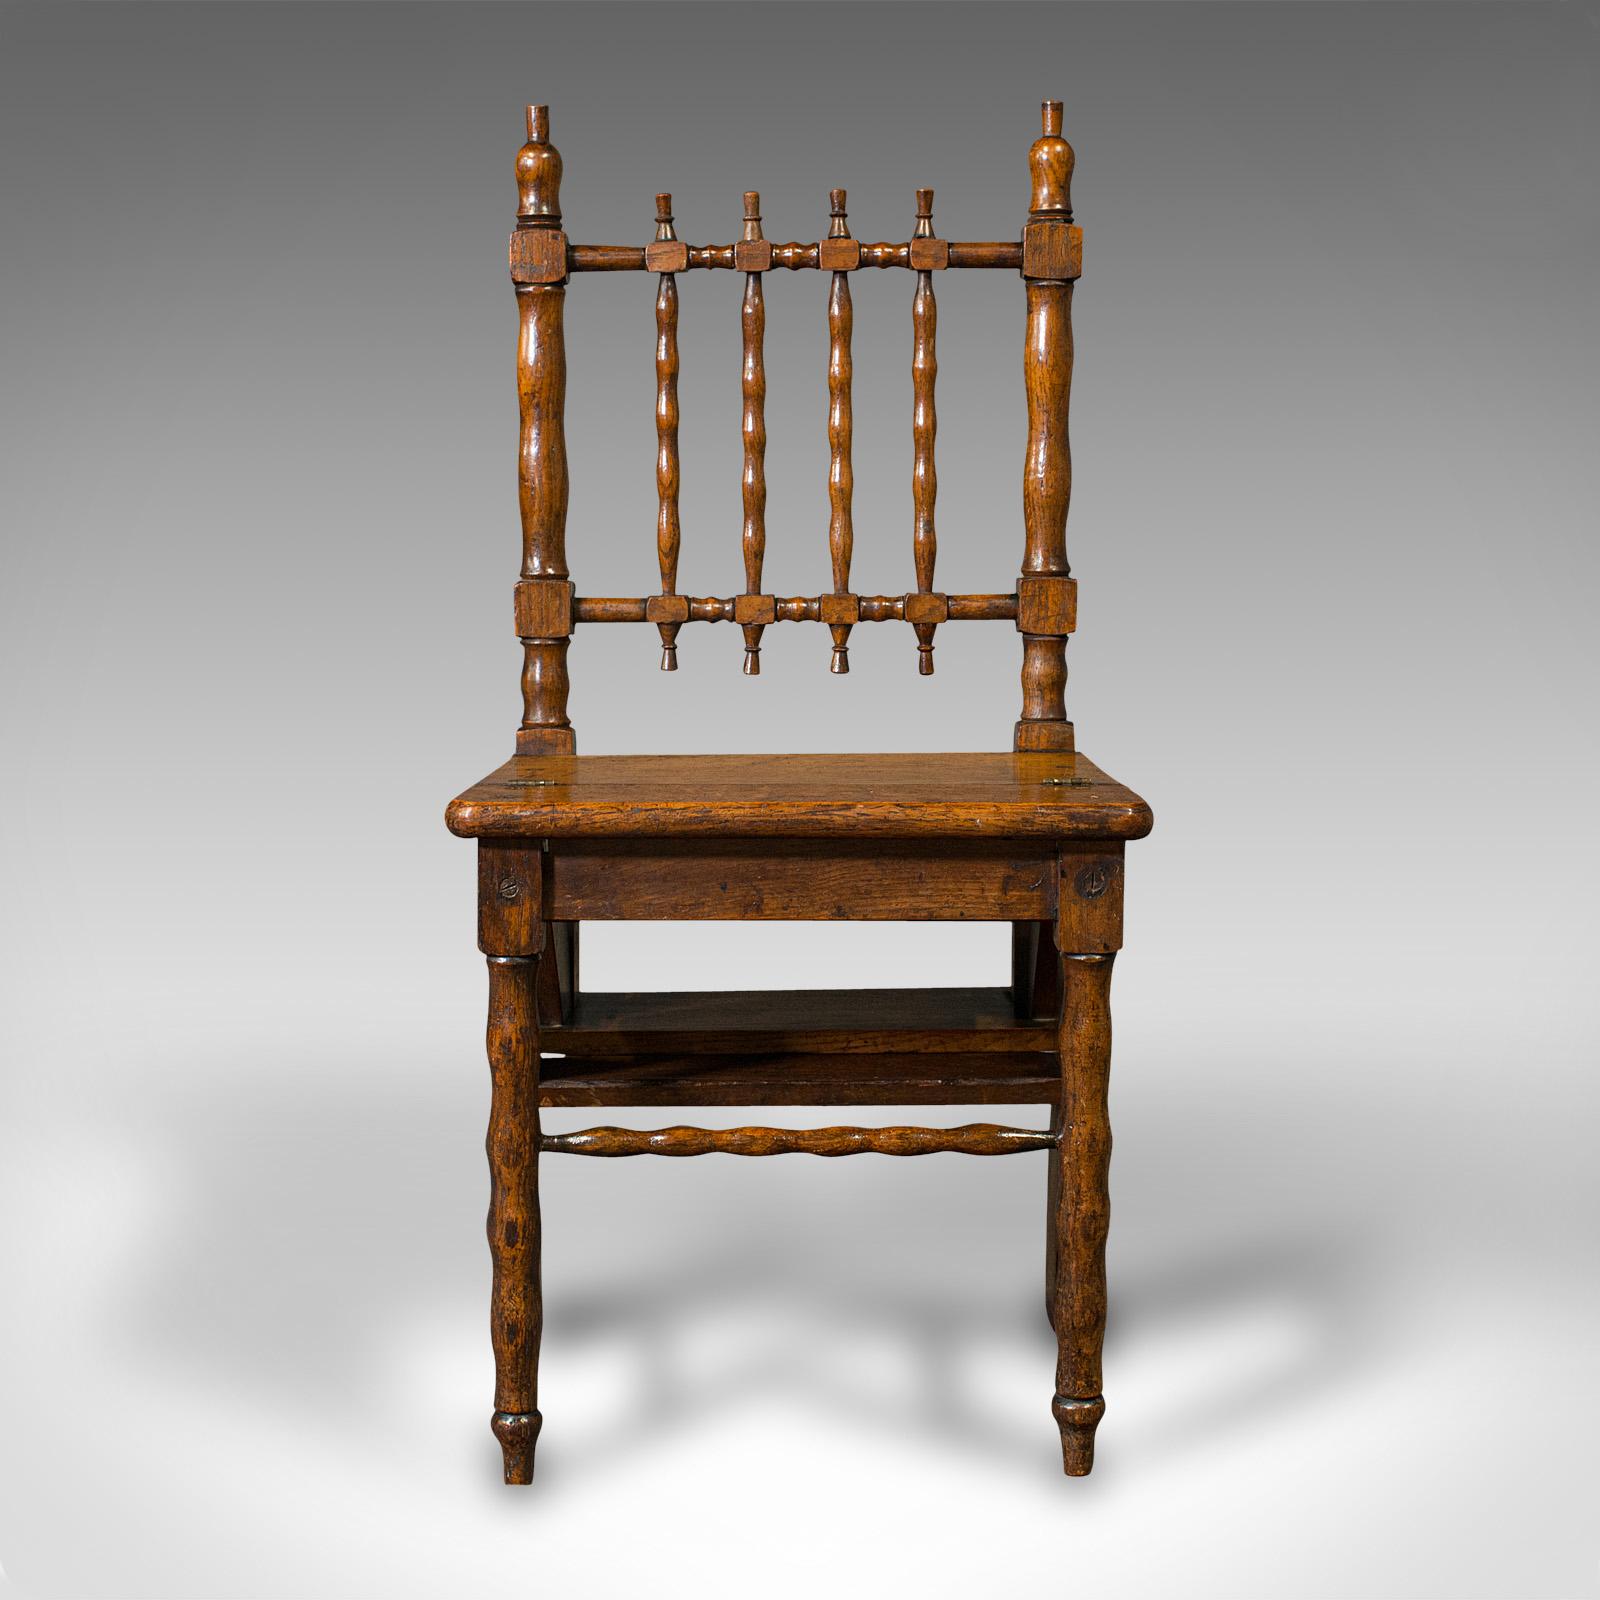 This is a set of antique metamorphic library steps. An English, oak folding chair, dating to the late Georgian period, circa 1820.

Fascinate guests with this attractive example of meubles à surprises - or surprise furniture
Displays a desirable